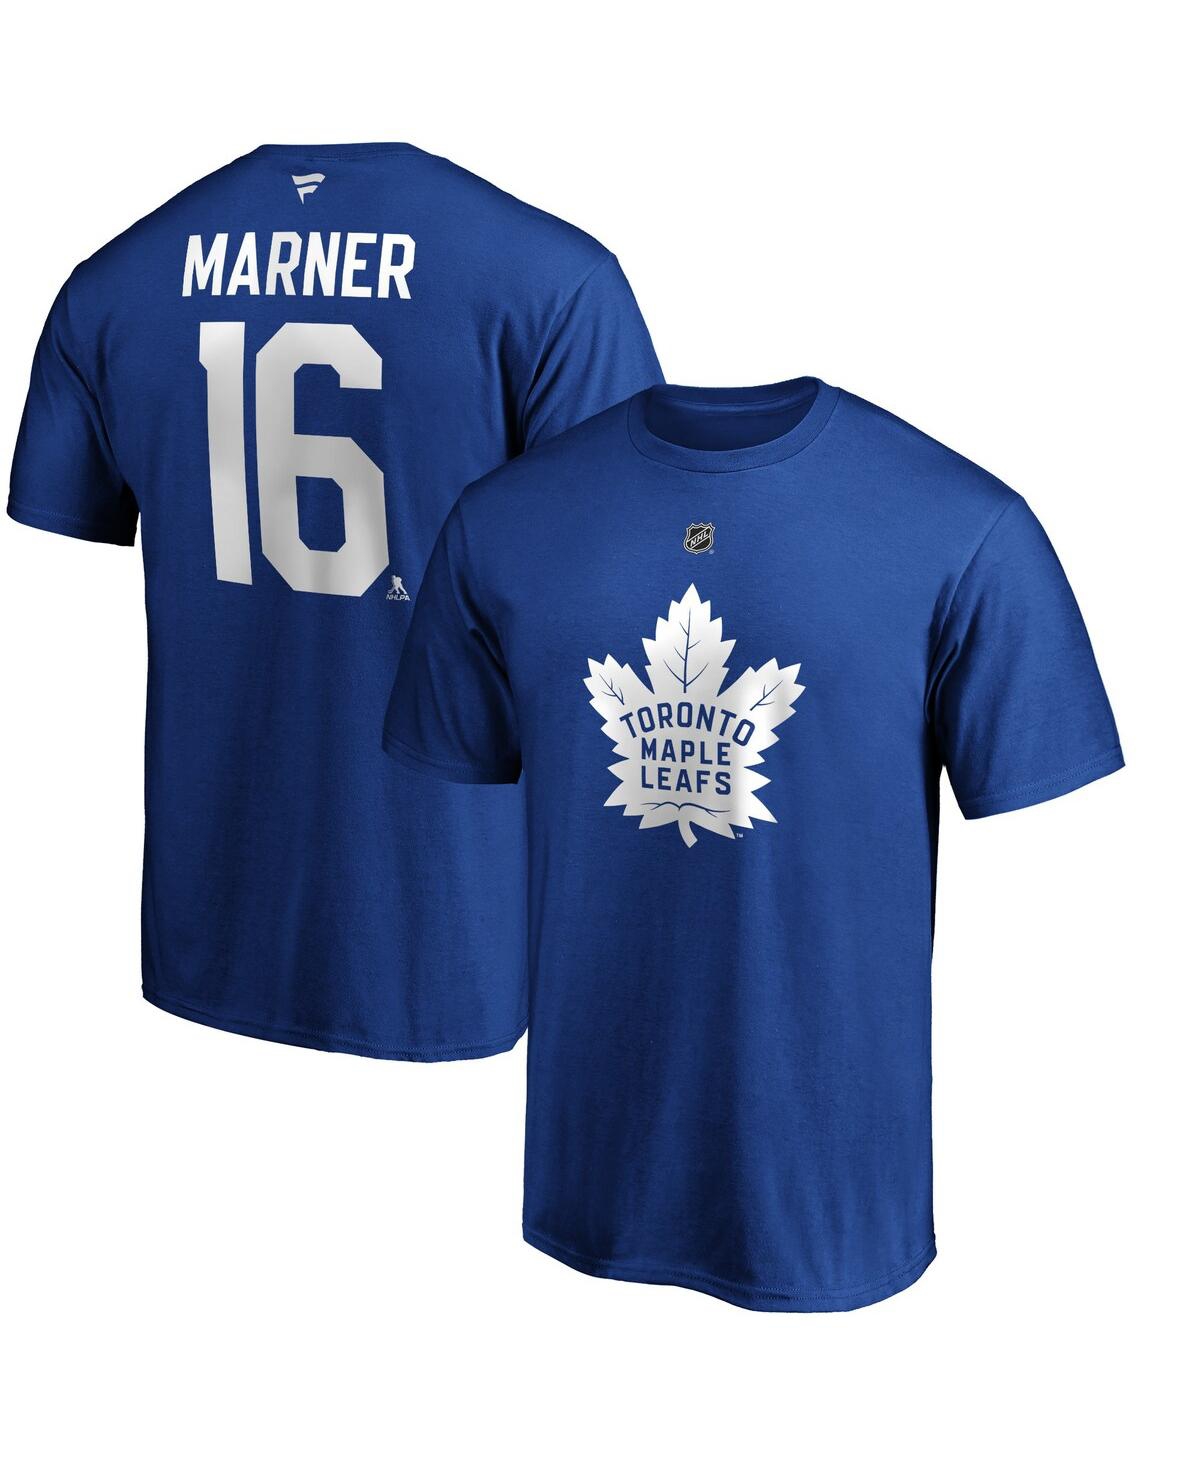 FANATICS MEN'S FANATICS MITCHELL MARNER BLUE TORONTO MAPLE LEAFS TEAM AUTHENTIC STACK NAME AND NUMBER T-SHIRT